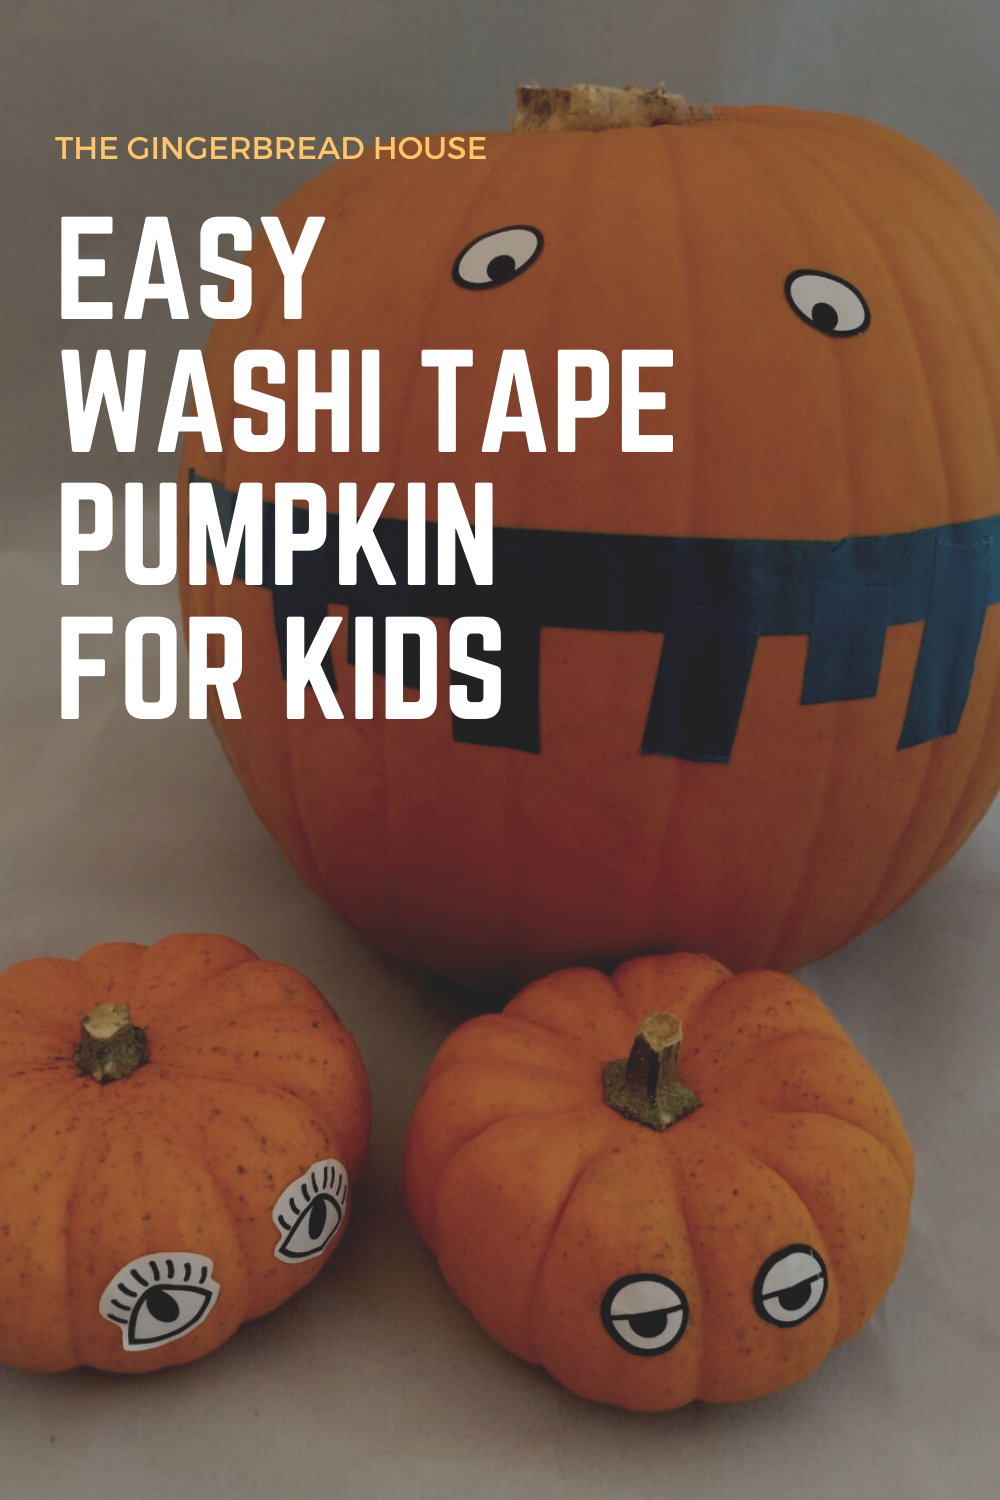 Ideas for Pumpkin Decorating Without Carving